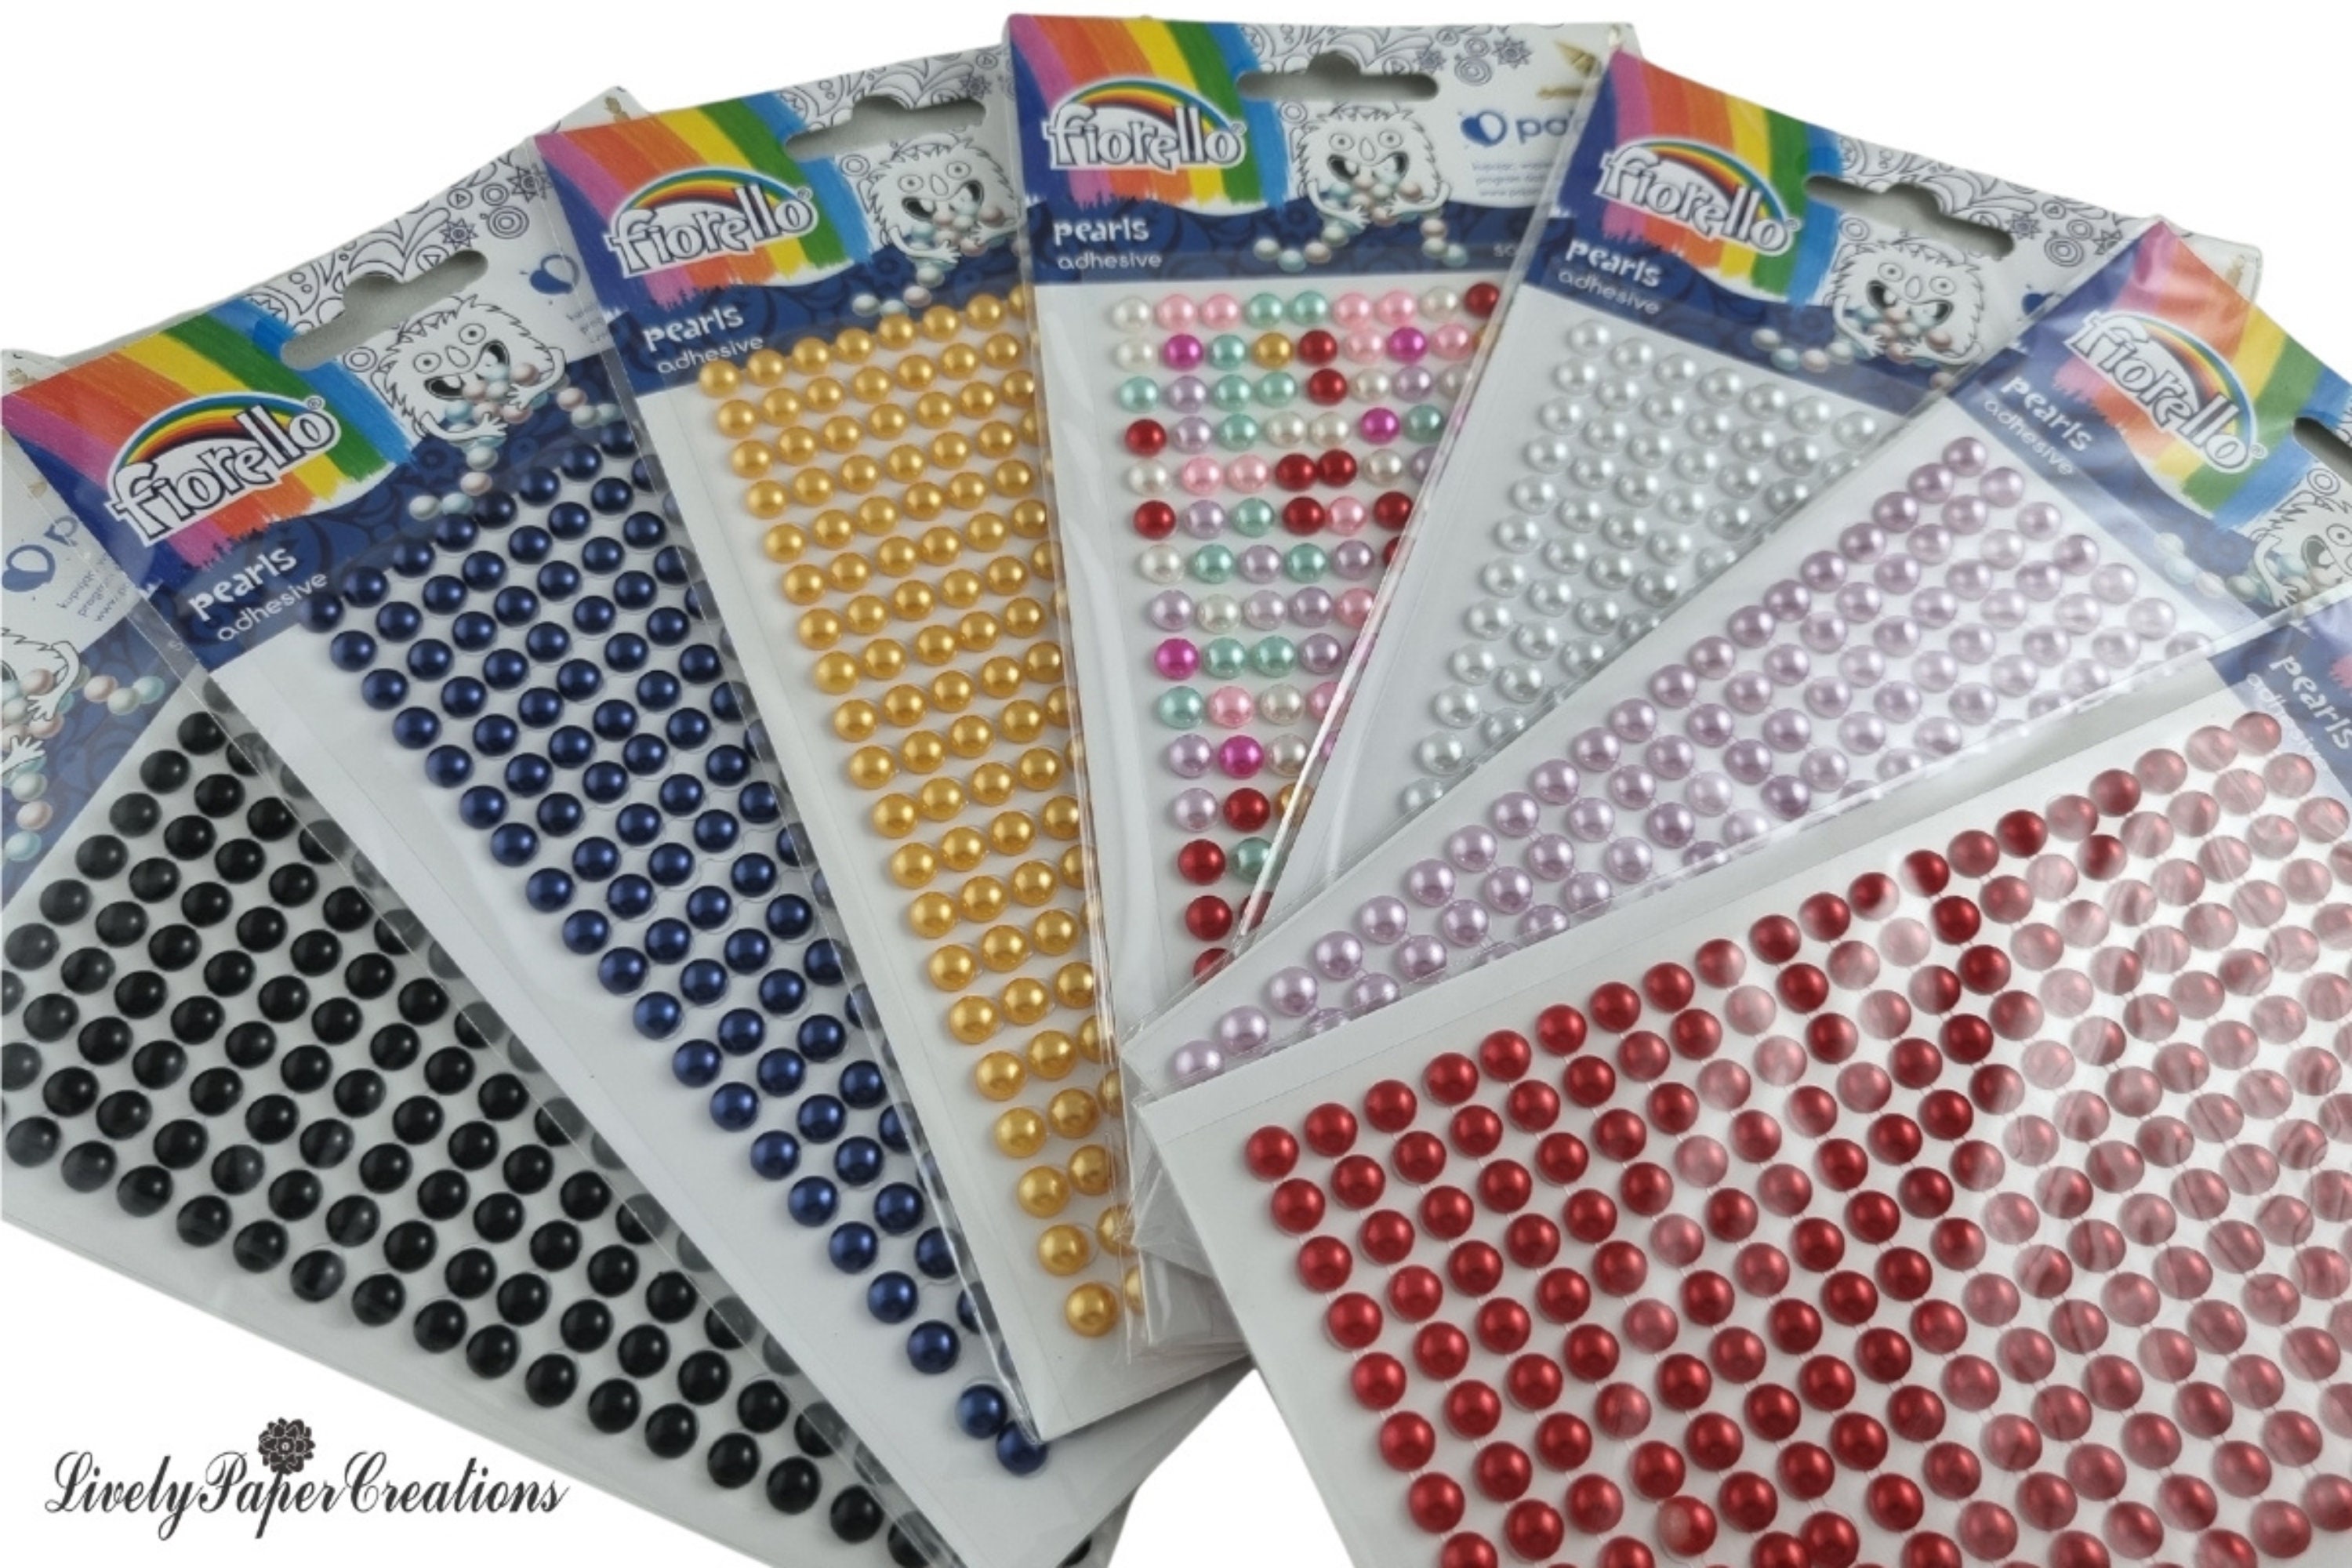 Incraftables Rhinestone Stickers 1150pcs. Self-Adhesive Bling Sticker Gems  for Crafts 3 - 15mm 